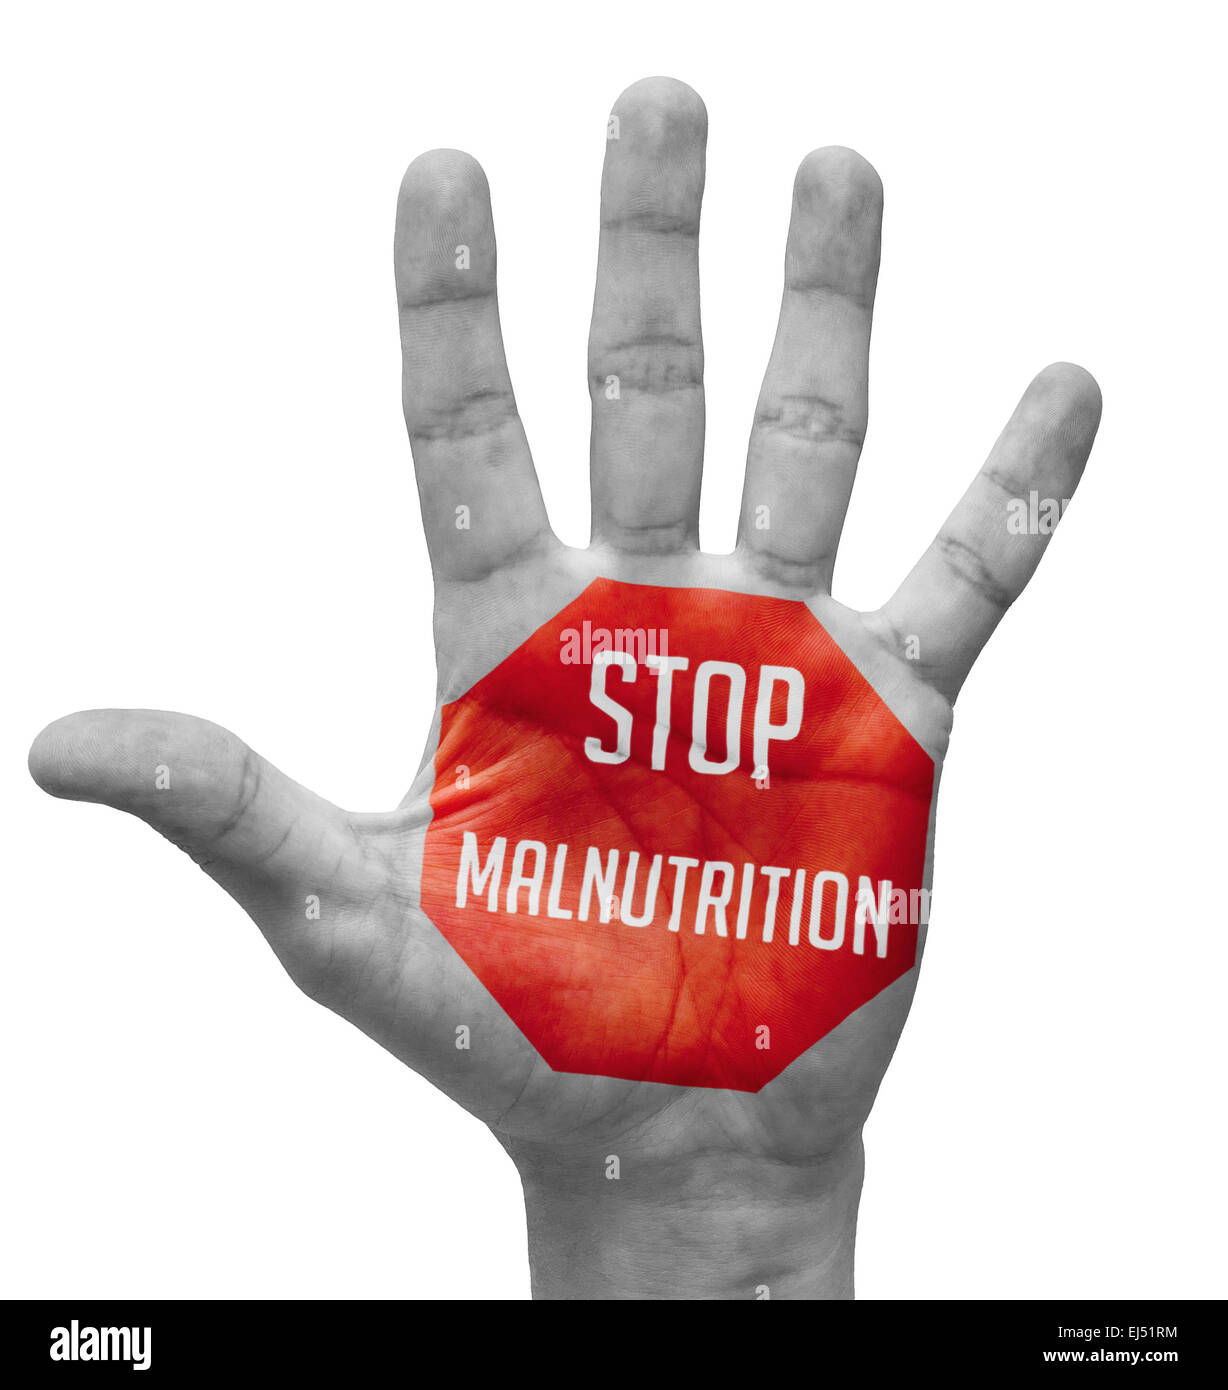 Stop Malnutrition Concept on Open Hand. Stock Photo